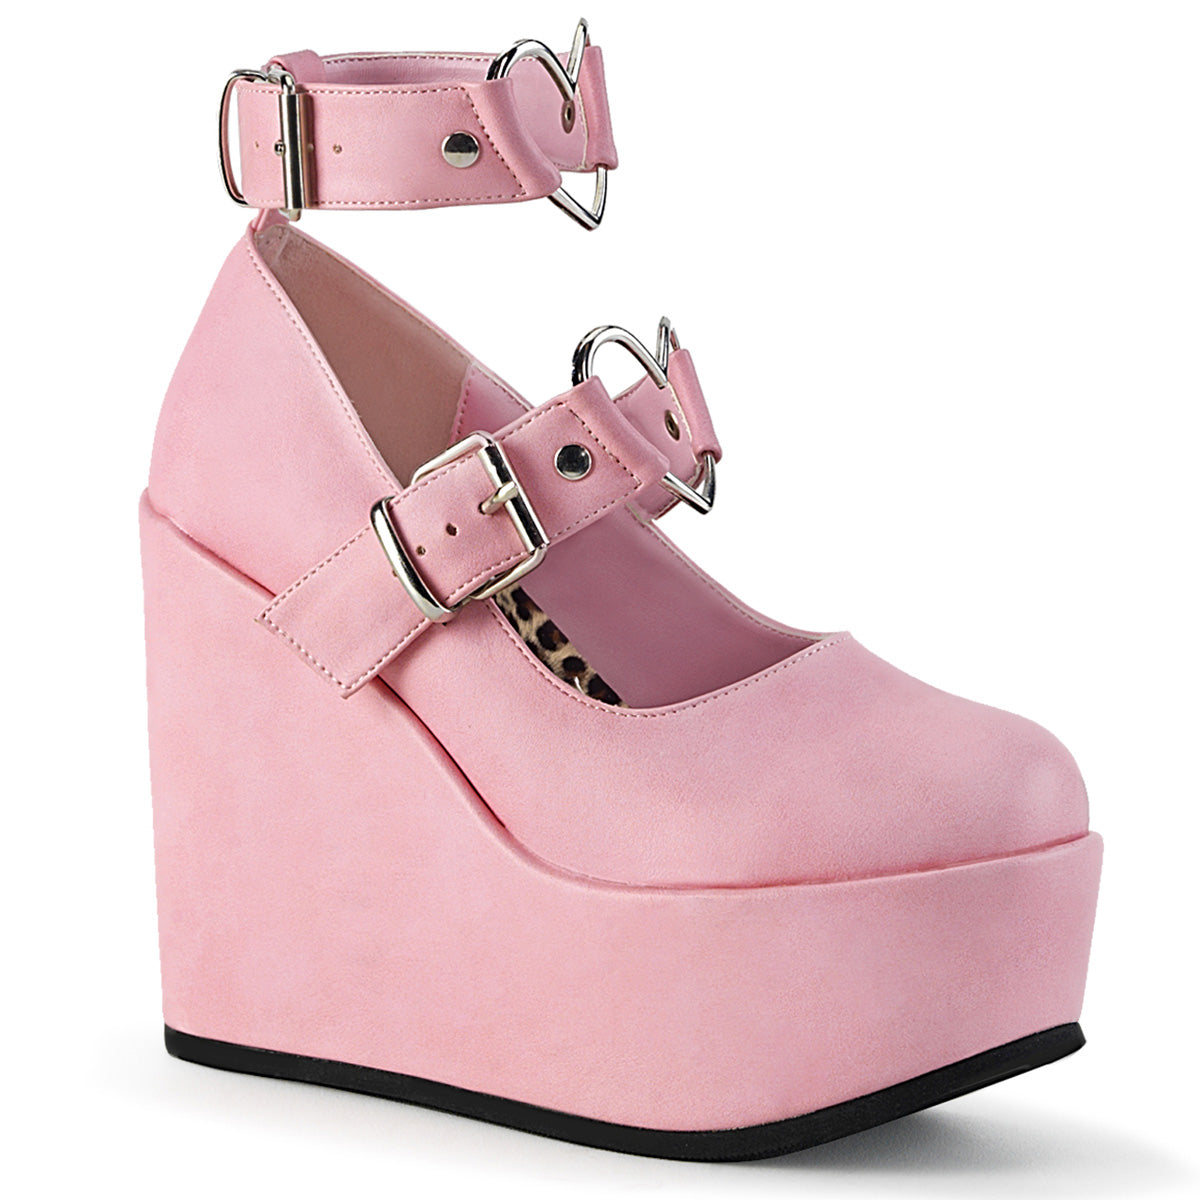 POISON-99-2 Baby Pink Vegan Leather